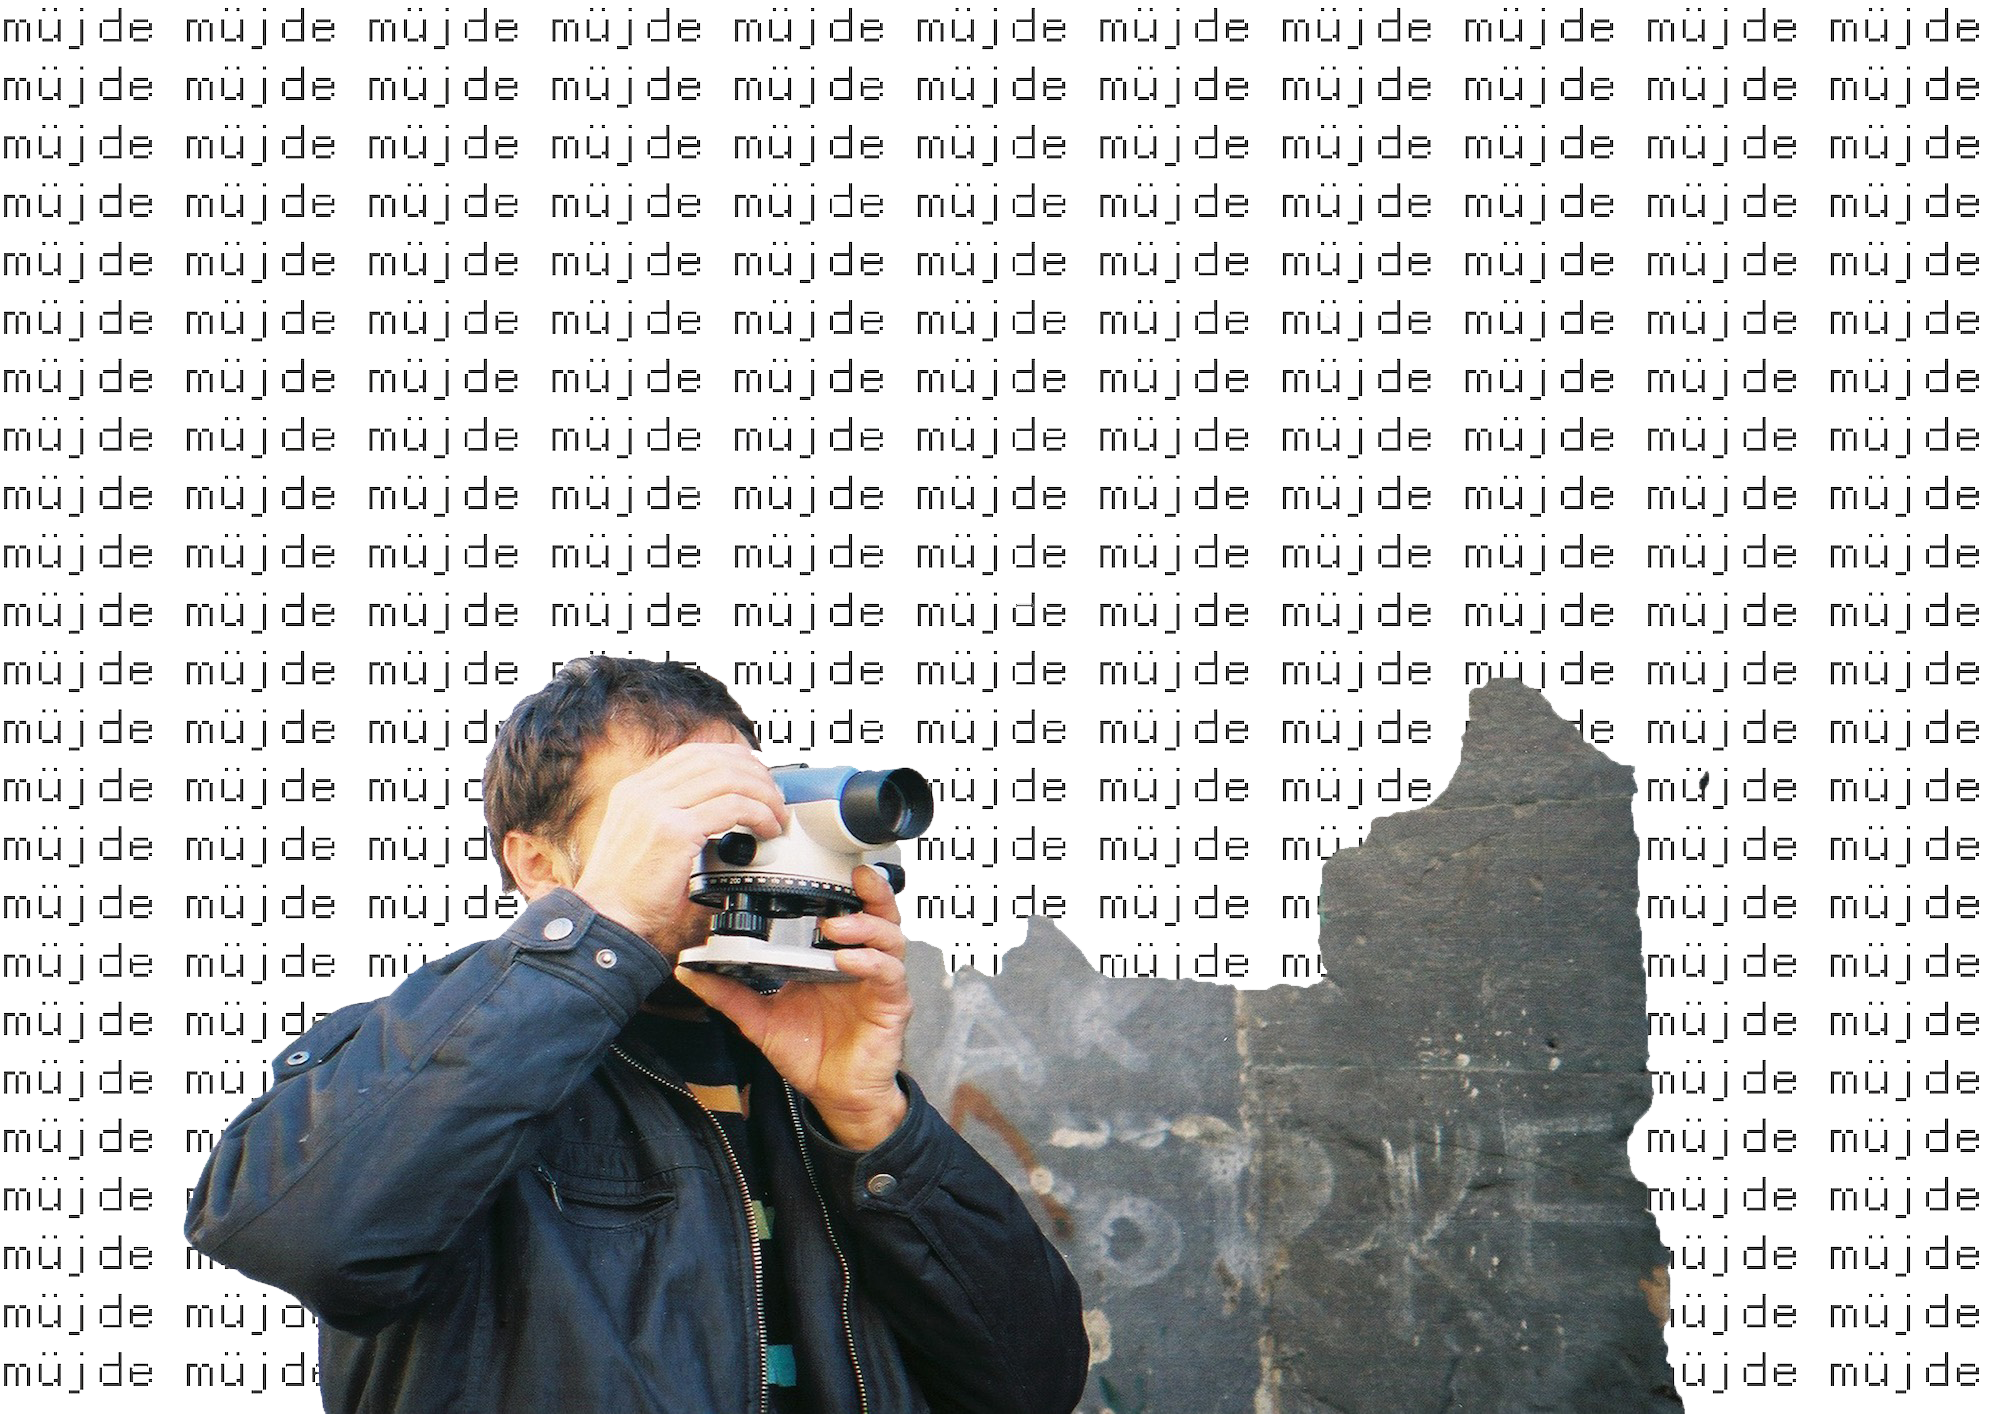 Collage of images and text showing a man holding a binocular on top of a pattern showing the word 'müjde' (miracle in Turkish) © Kıvılcım S Güngörün